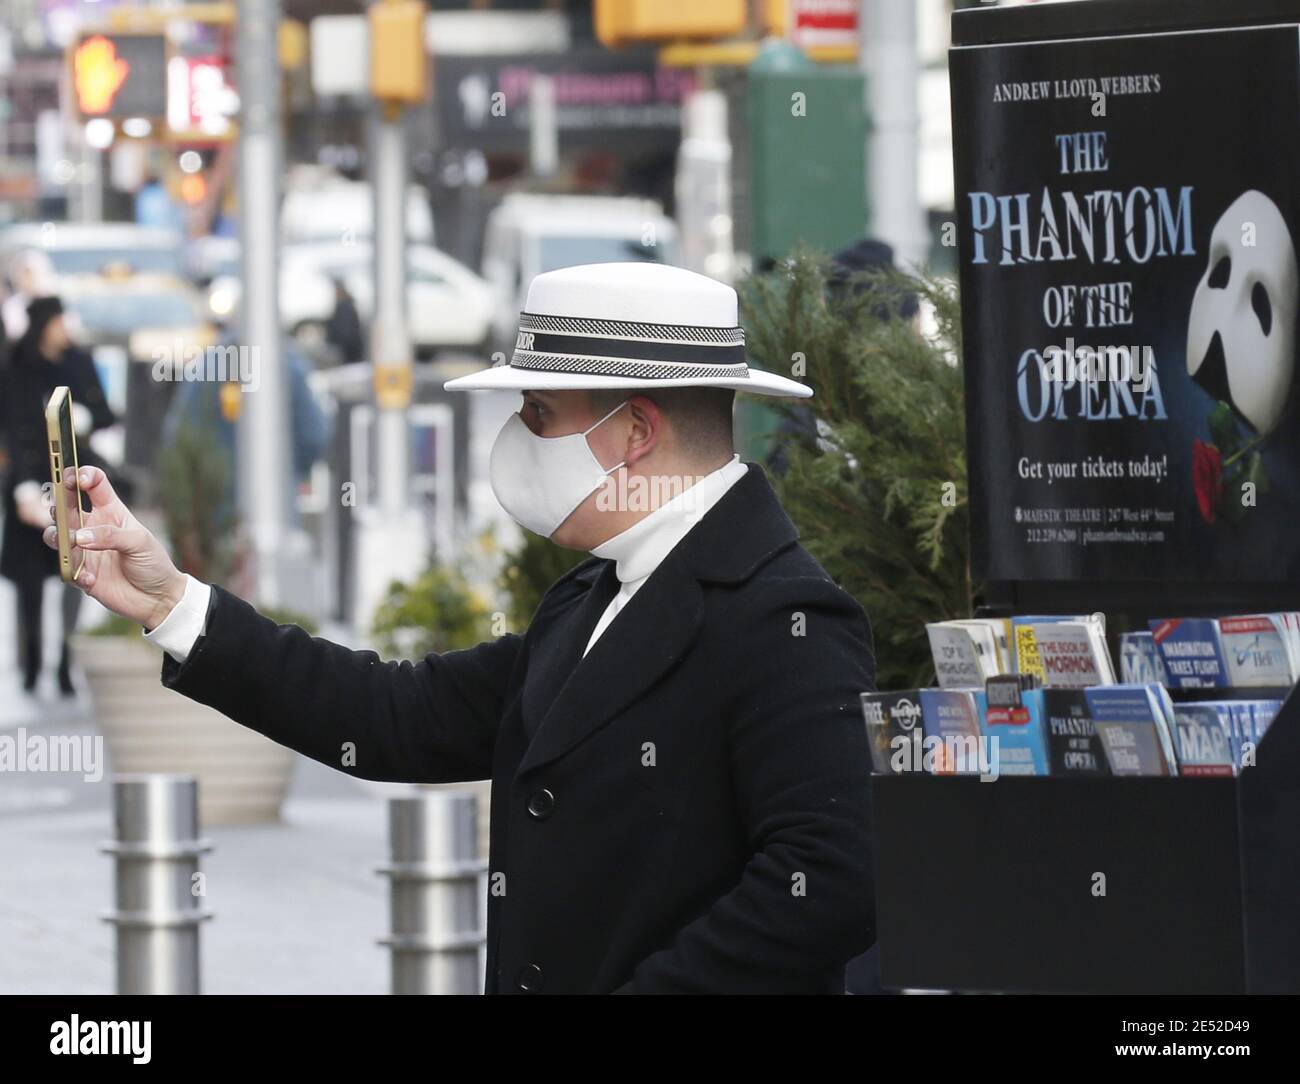 New York, United States. 25th Jan, 2021. A man takes a photo near a poster for the Broadway show Phantom Of The Opera as Times Square remains quiet of pedestrian and automobile traffic due to the coronavirus pandemic in New York City on Monday, January 25, 2021. Photo by John Angelillo/UPI Credit: UPI/Alamy Live News Stock Photo